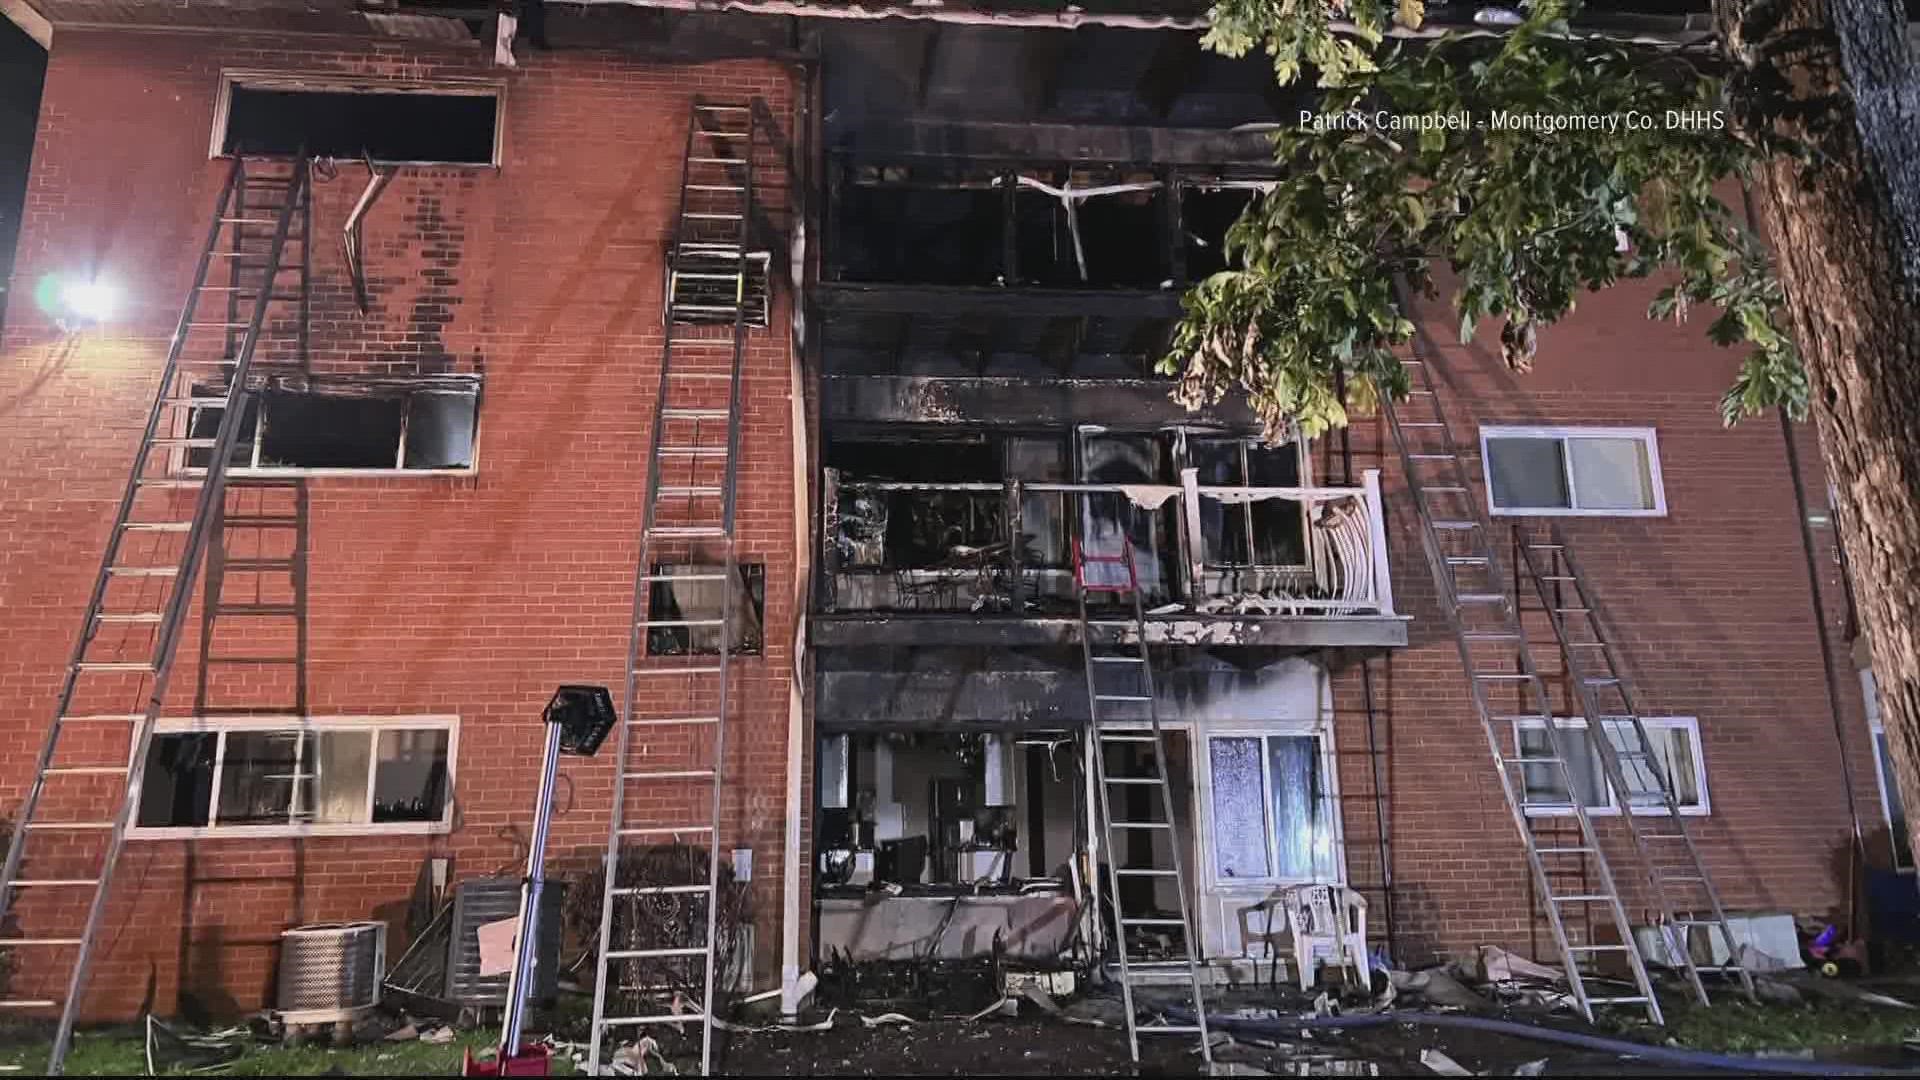 More than a dozen people are without a place to stay after a fire ripped through an apartment building in the Silver Spring/Glenmont area of Montgomery County.